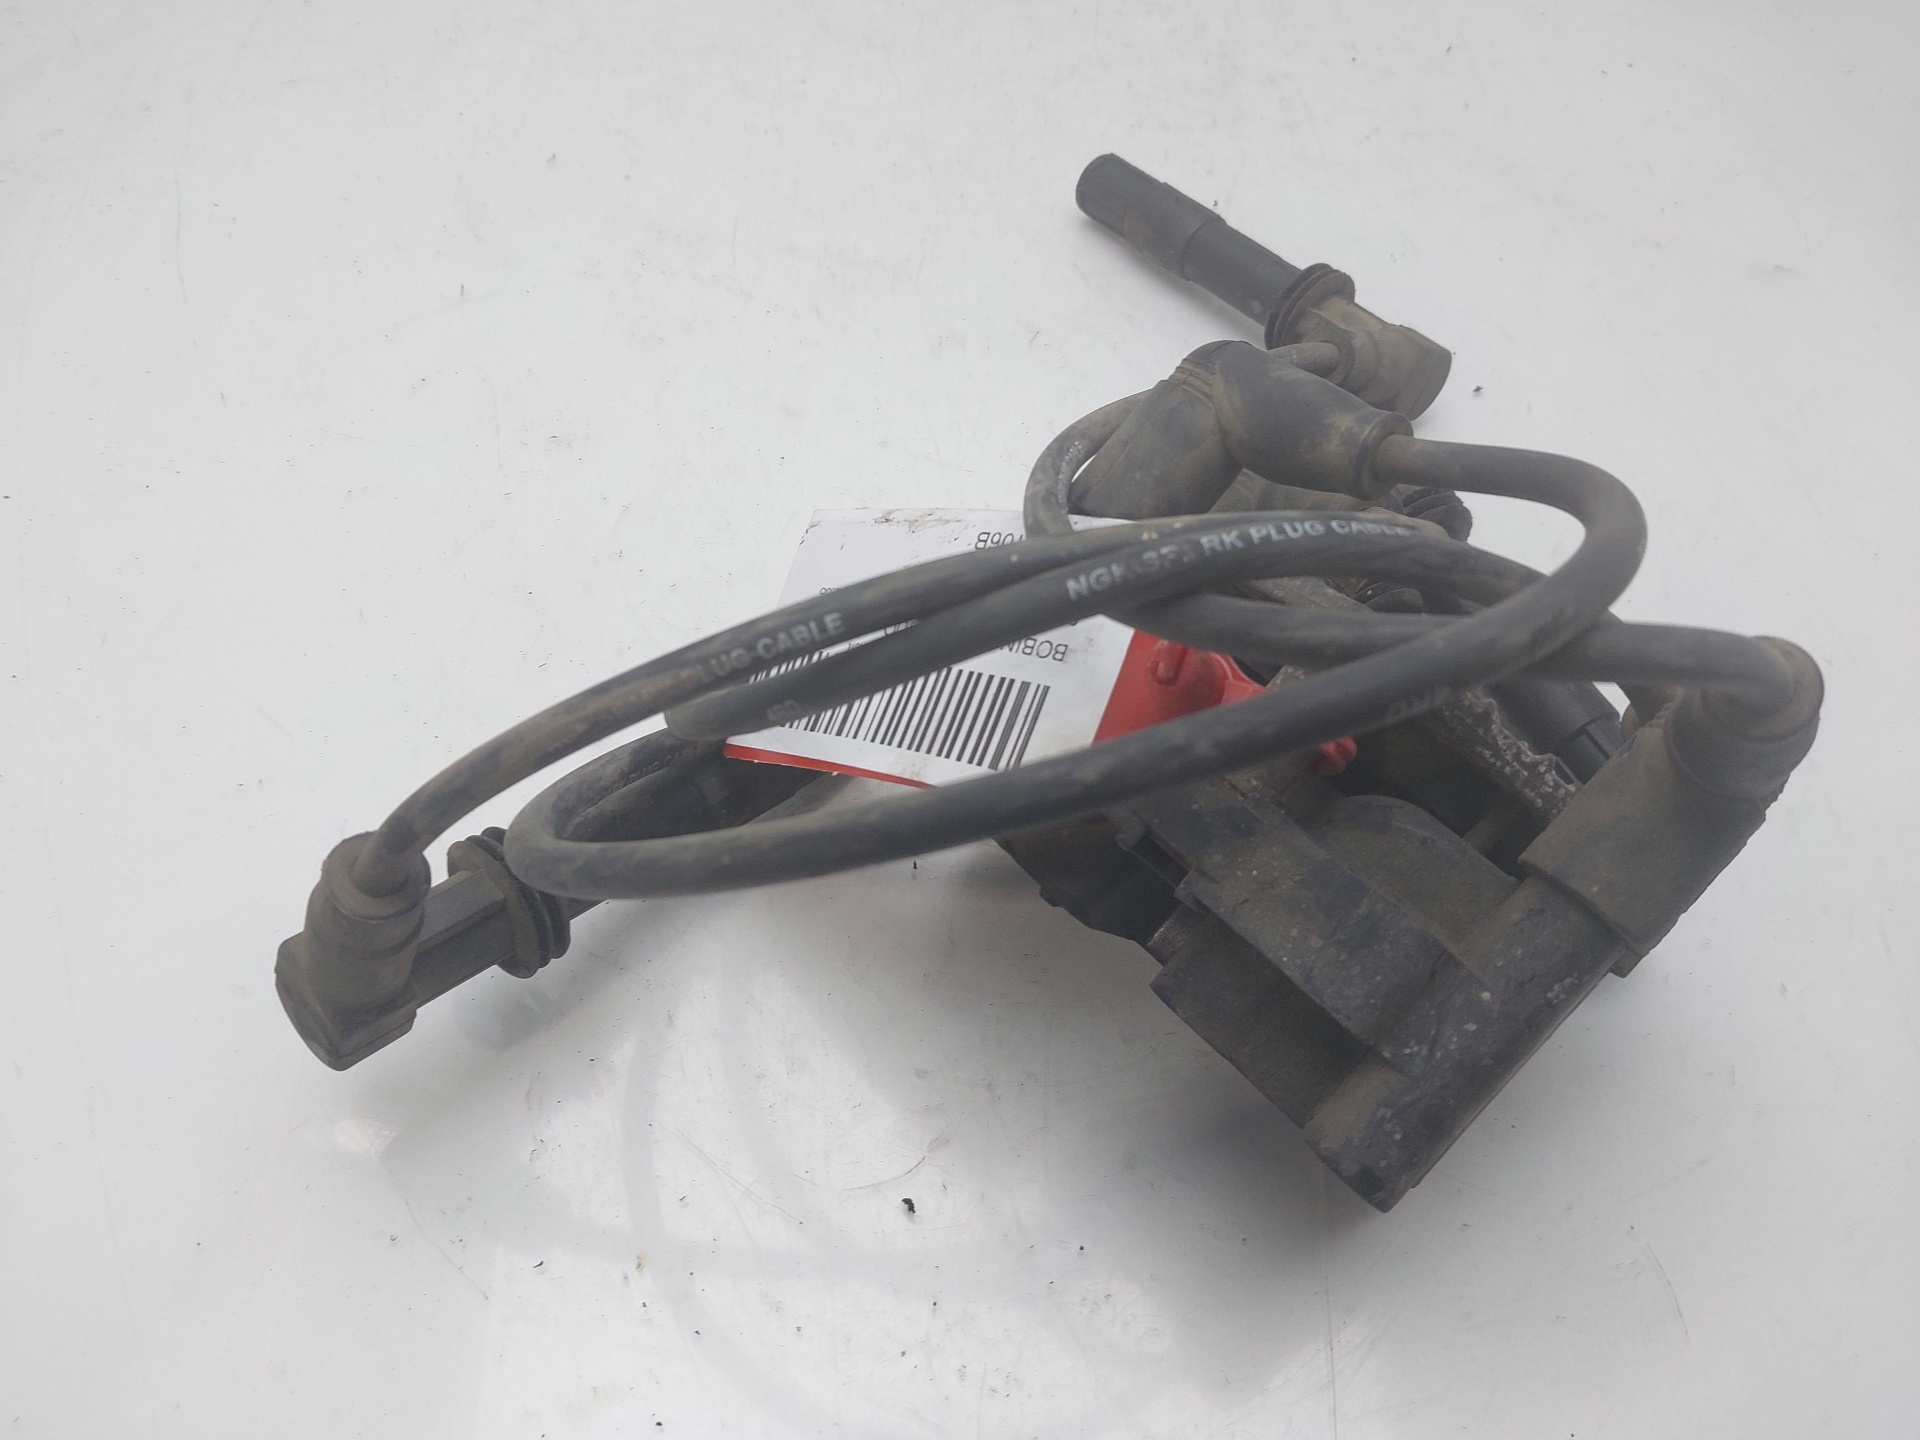 SEAT Leon 1 generation (1999-2005) High Voltage Ignition Coil 032905106B 20644397